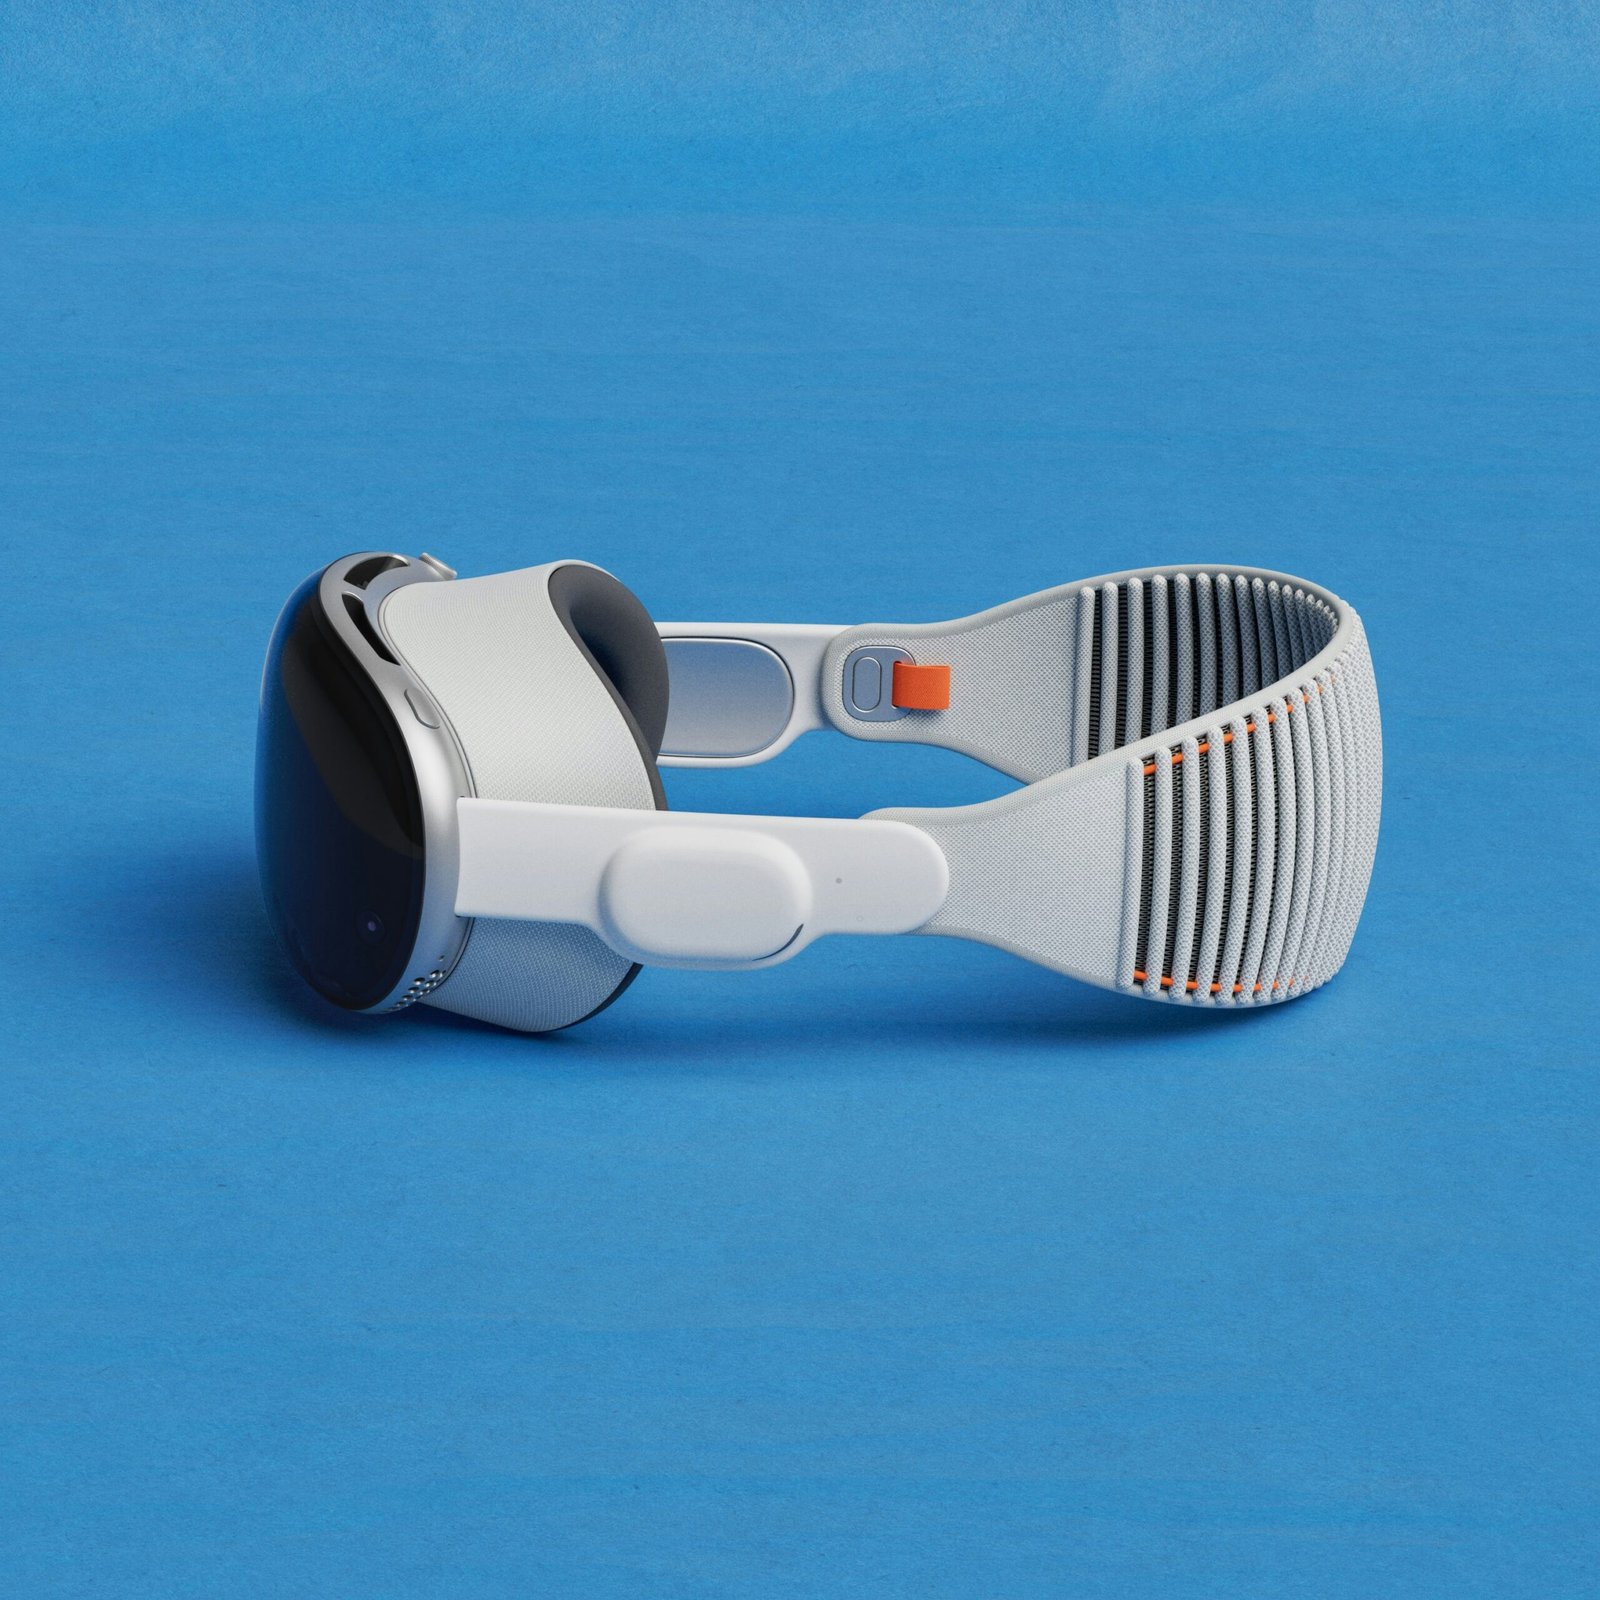 a pair of google glasses on a blue surface